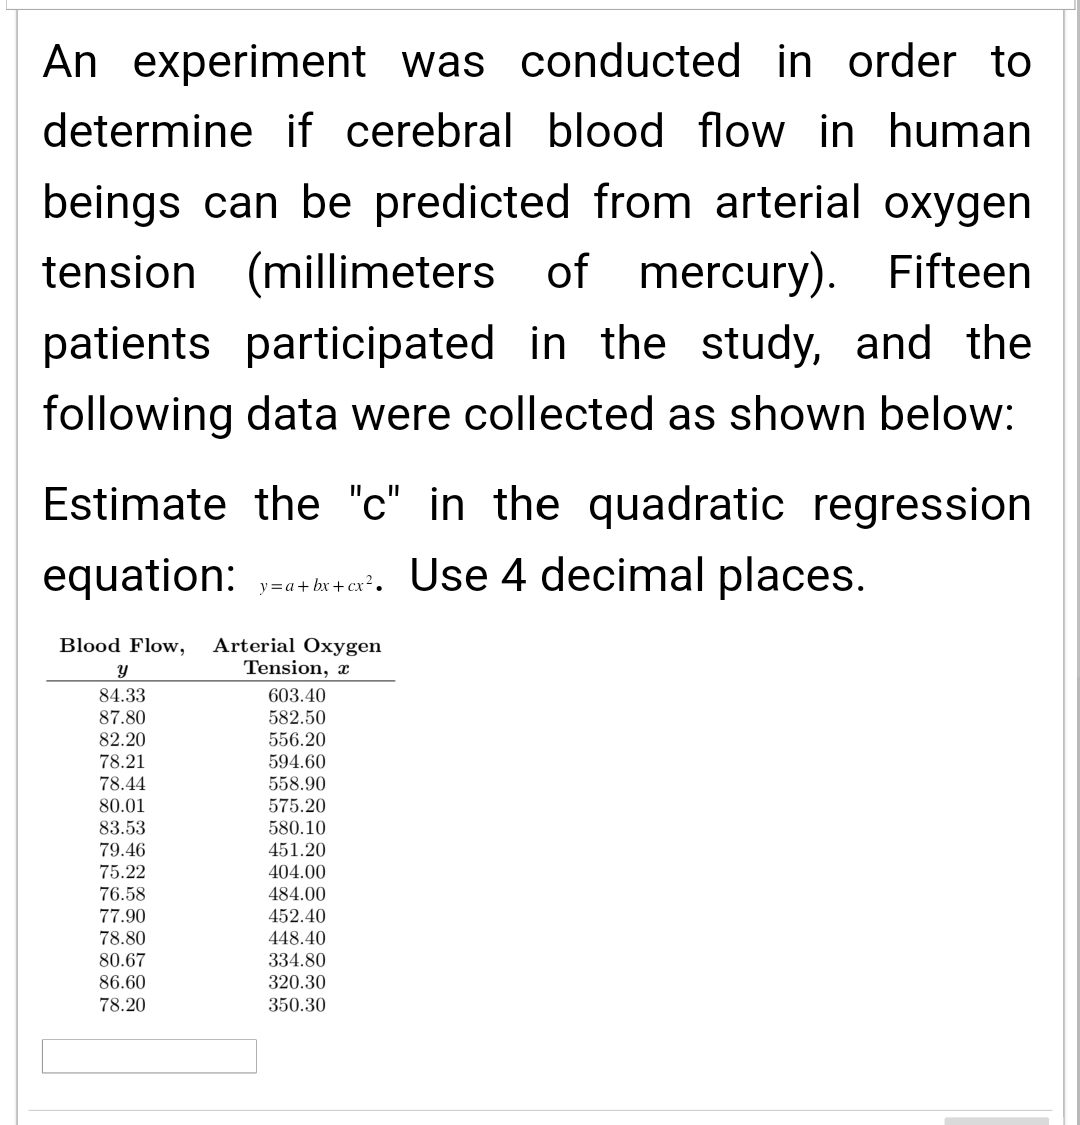 An experiment was conducted in order to
determine if cerebral blood flow in human
beings can be predicted from arterial oxygen
tension (millimeters of
of mercury). Fifteen
patients participated in the study, and the
following data were collected as shown below:
Estimate the "c" in the quadratic regression
equation: yah². Use 4 decimal places.
y=a+bx+cx².
Blood Flow, Arterial Oxygen
Tension, a
Y
84.33
87.80
82.20
78.21
78.44
80.01
83.53
79.46
75.22
76.58
77.90
78.80
80.67
86.60
78.20
603.40
582.50
556.20
594.60
558.90
575.20
580.10
451.20
404.00
484.00
452.40
448.40
334.80
320.30
350.30